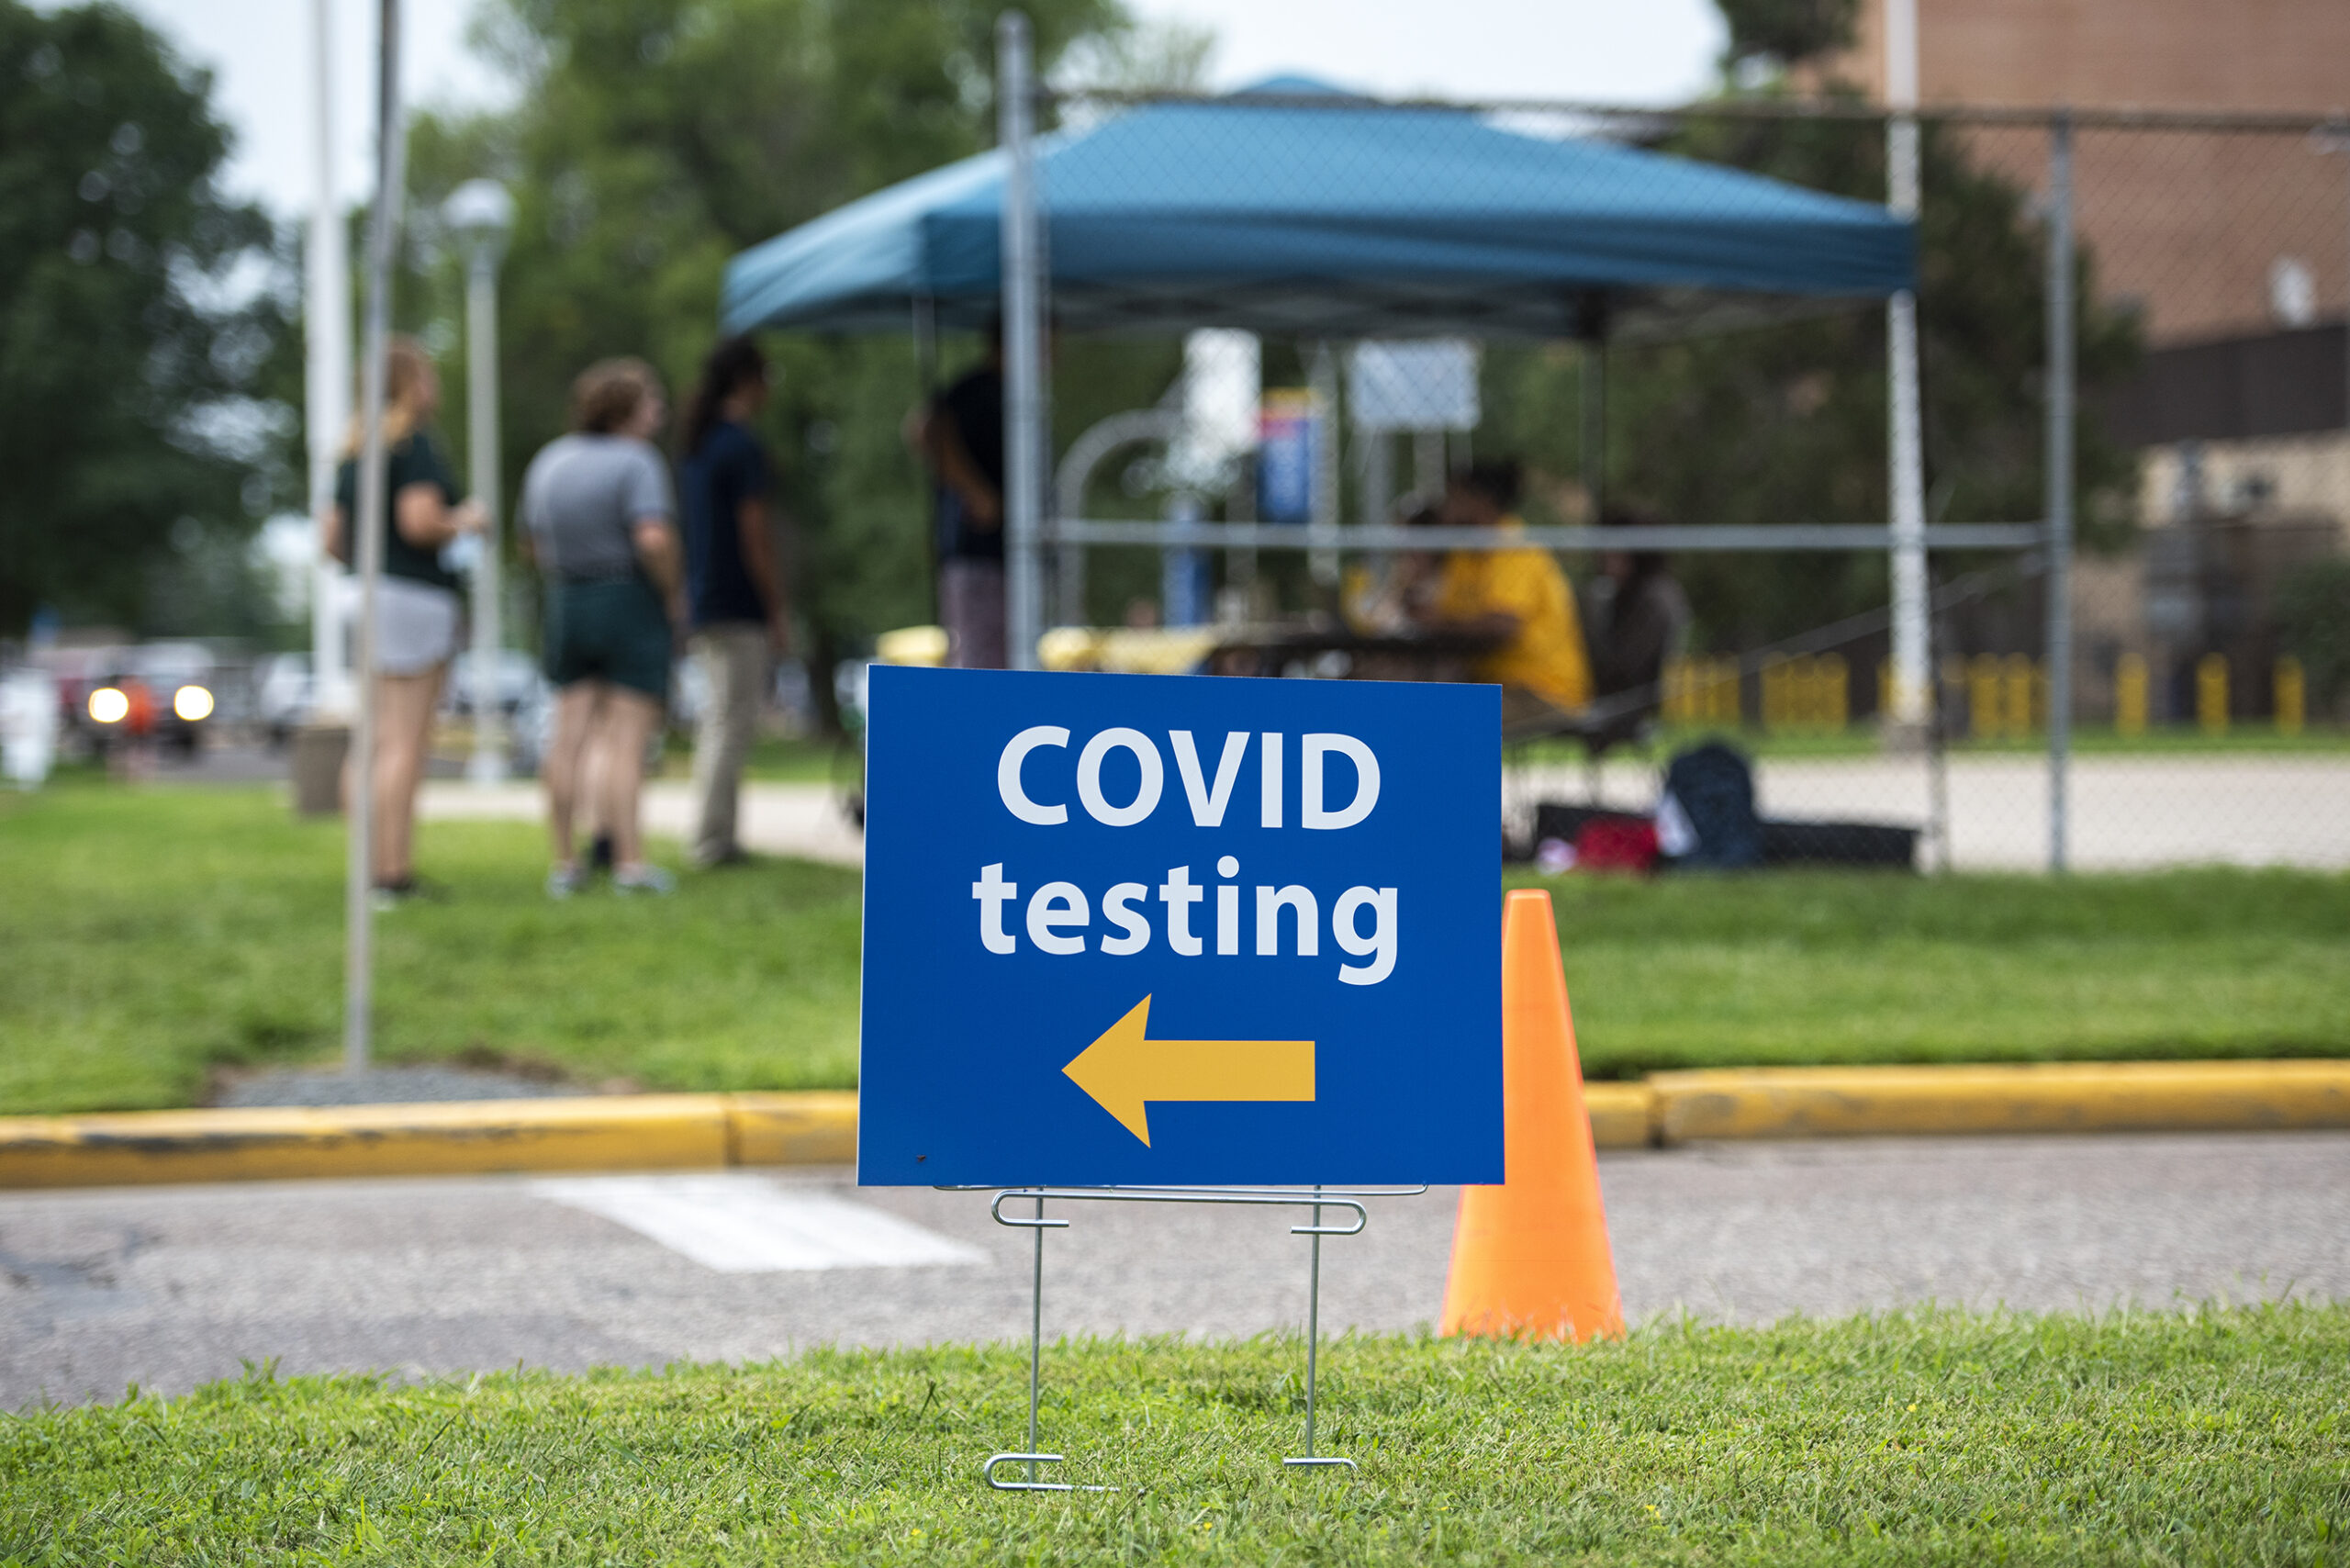 A blue sign says "COVID Testing" on it.